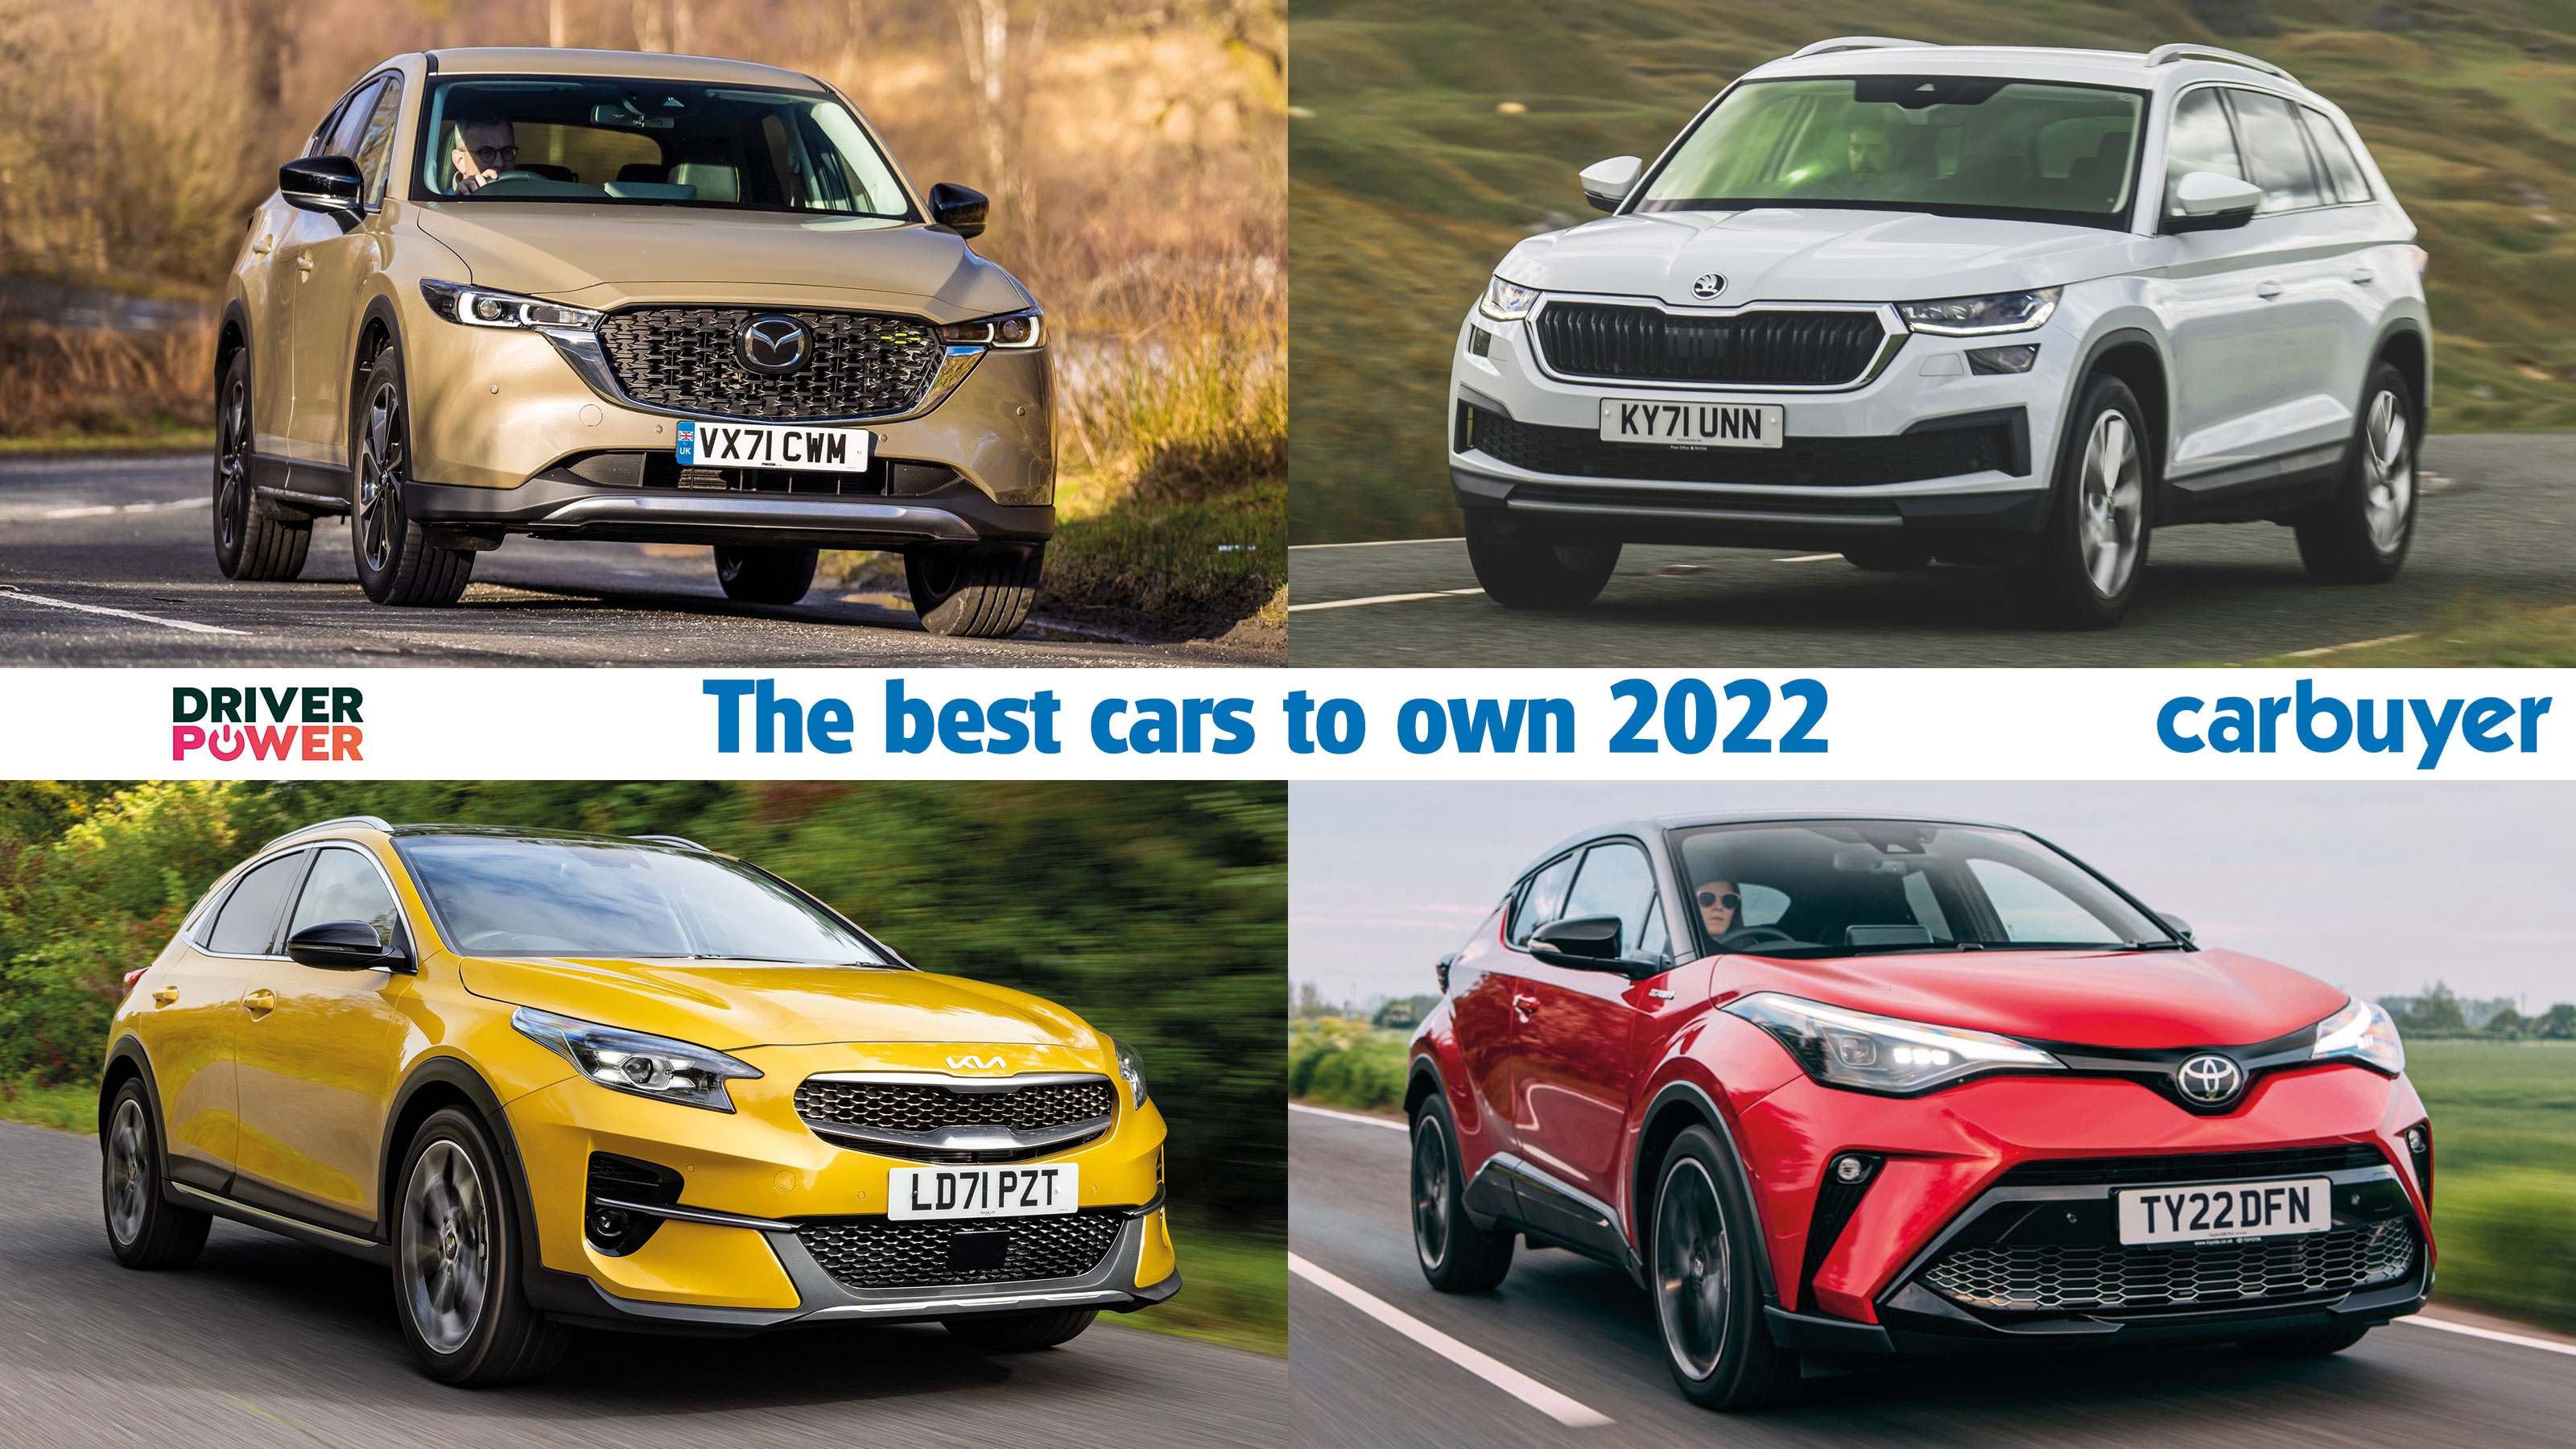 Which automotive model has one of the best UK automotive sellers in 2022?